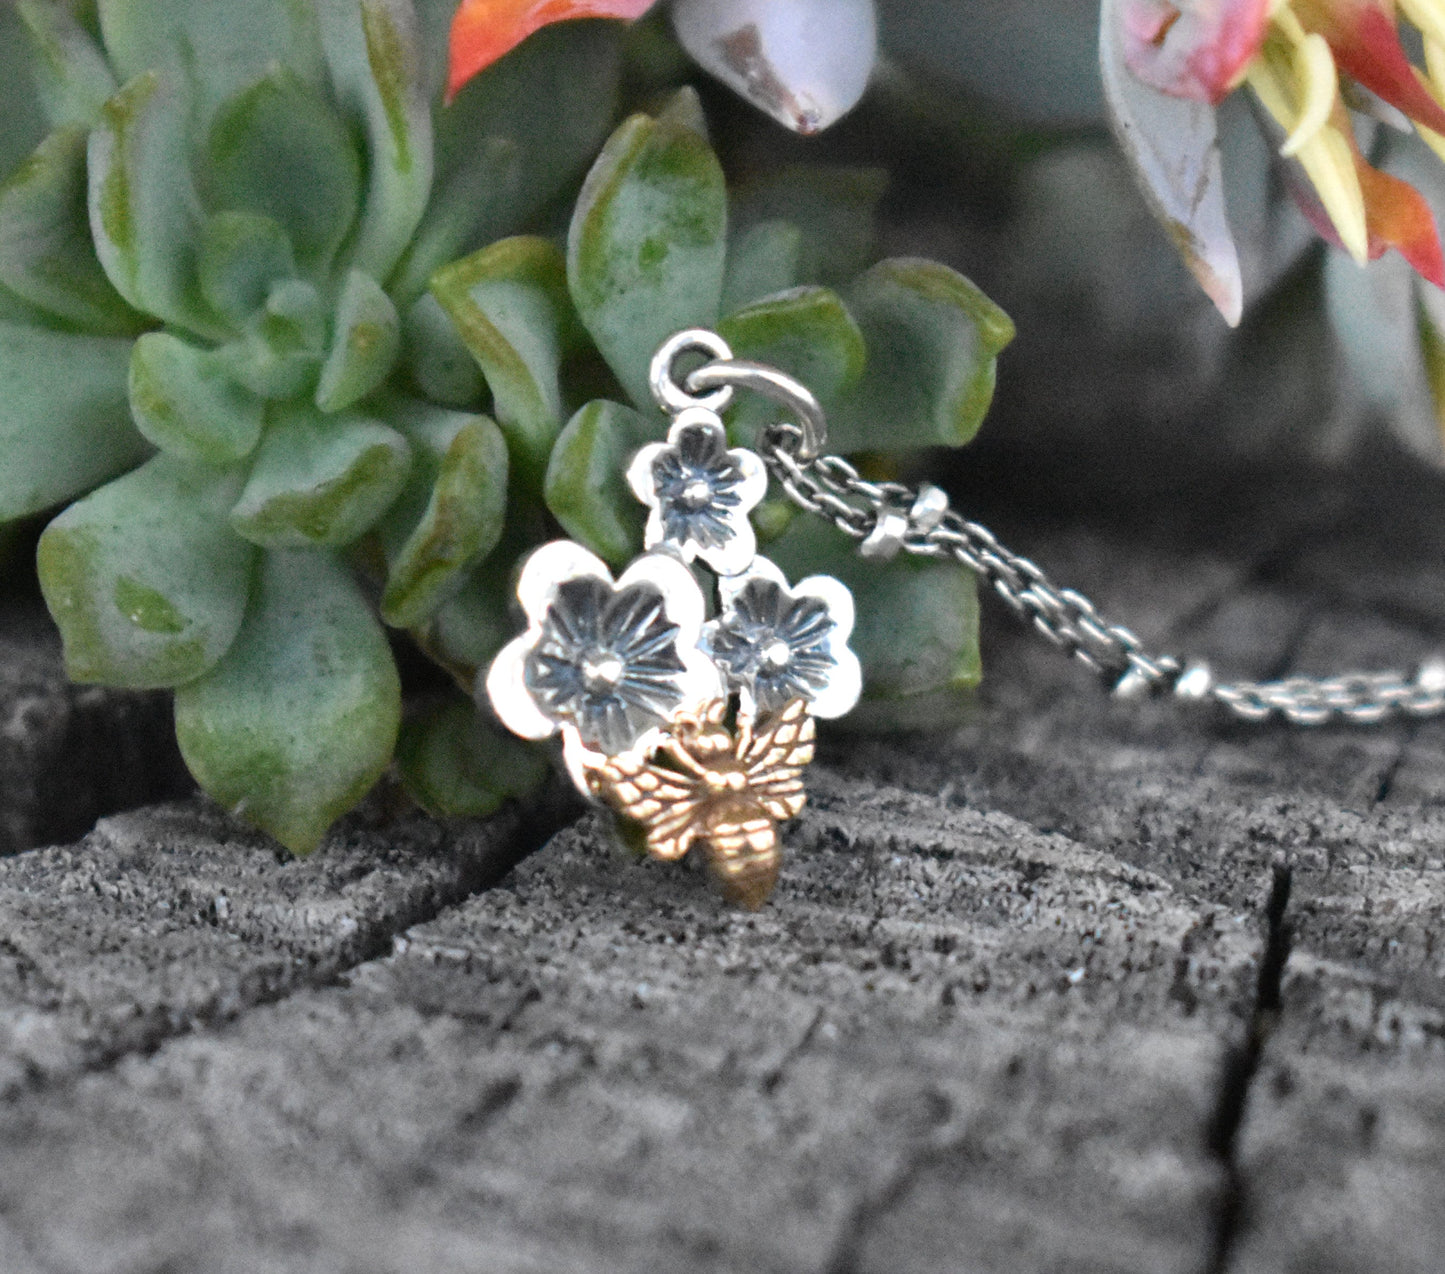 Cherry Blossom Necklace- Honeybee Necklace, Bee Jewelry, Gold Bee Necklace